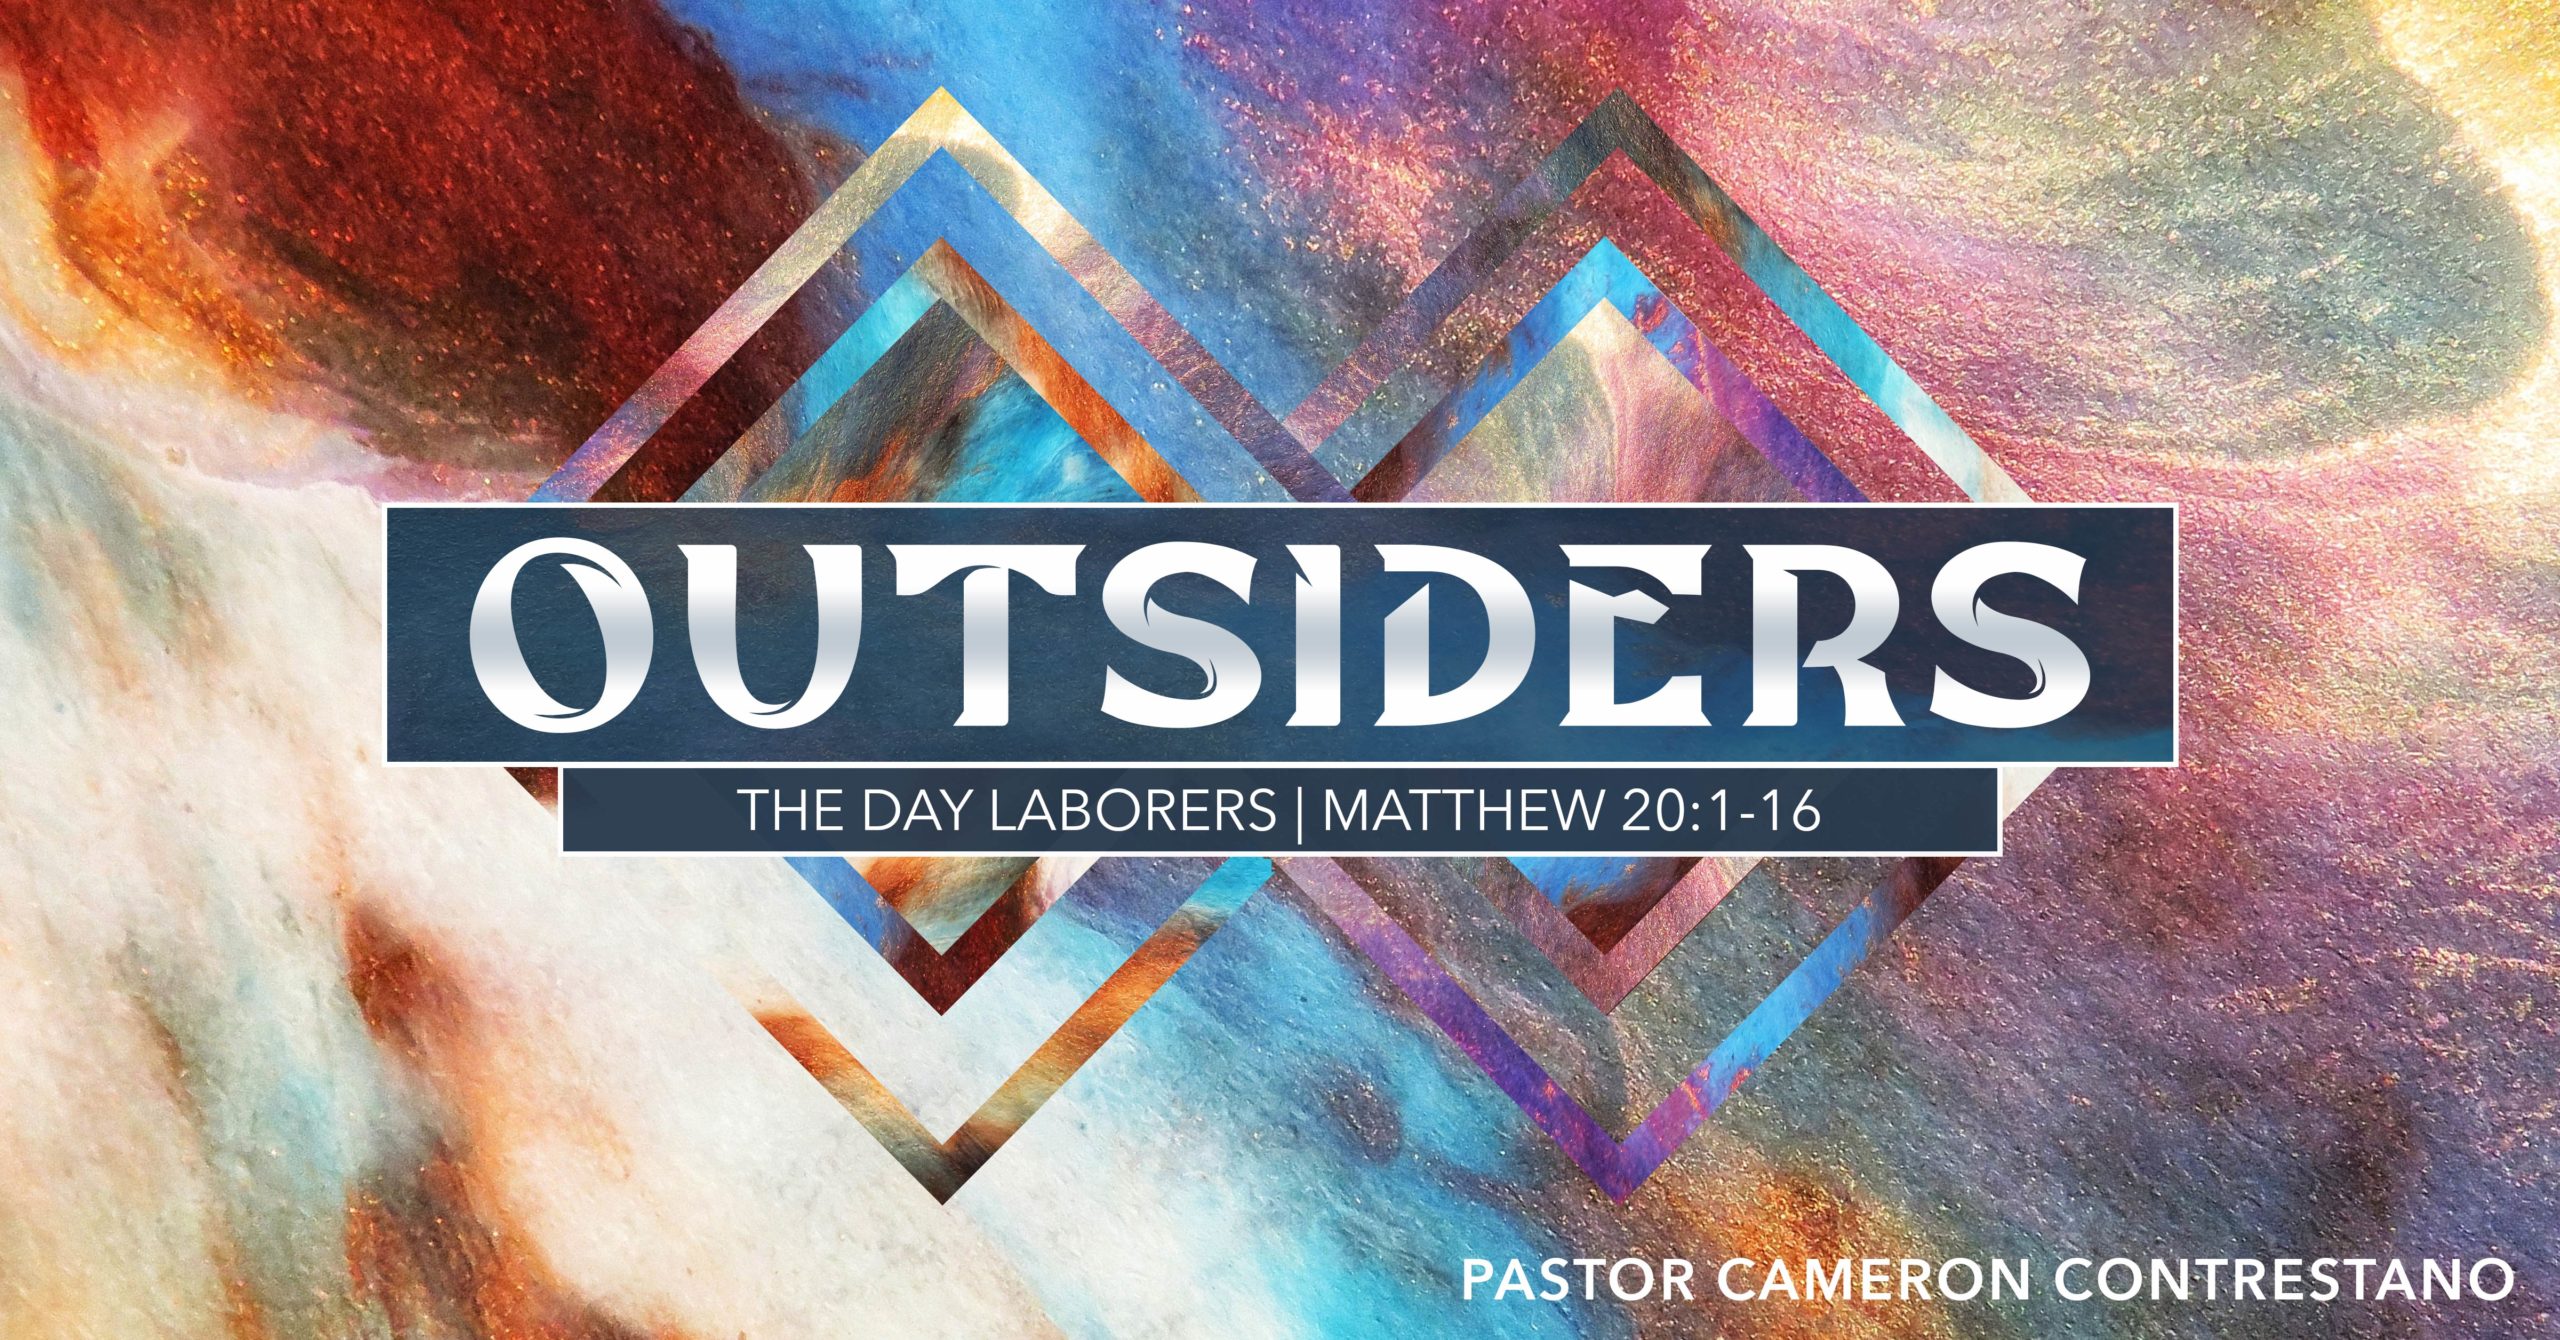 Outsiders: The Day Laborers